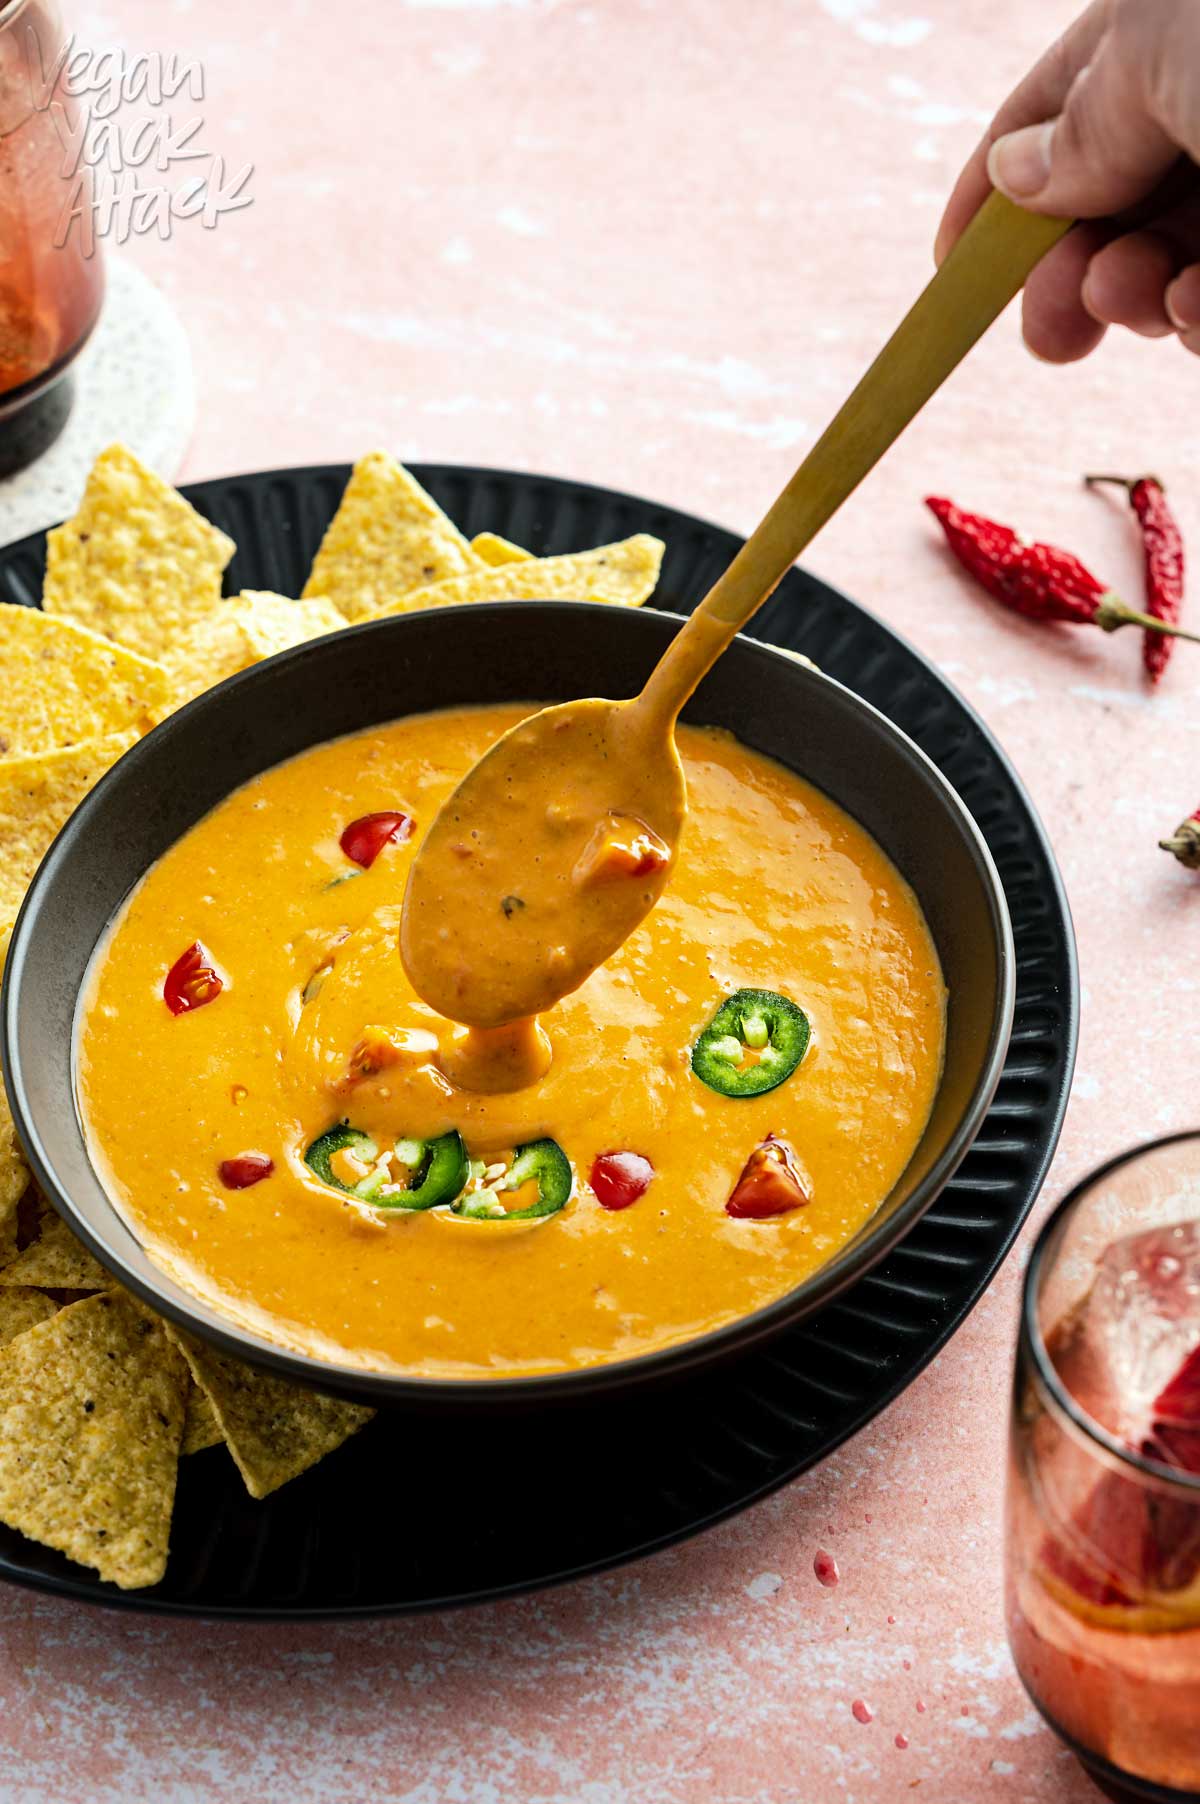 Bowl of bright orange queso dip on a plate with chips, on pink background with spoon scooping queso up